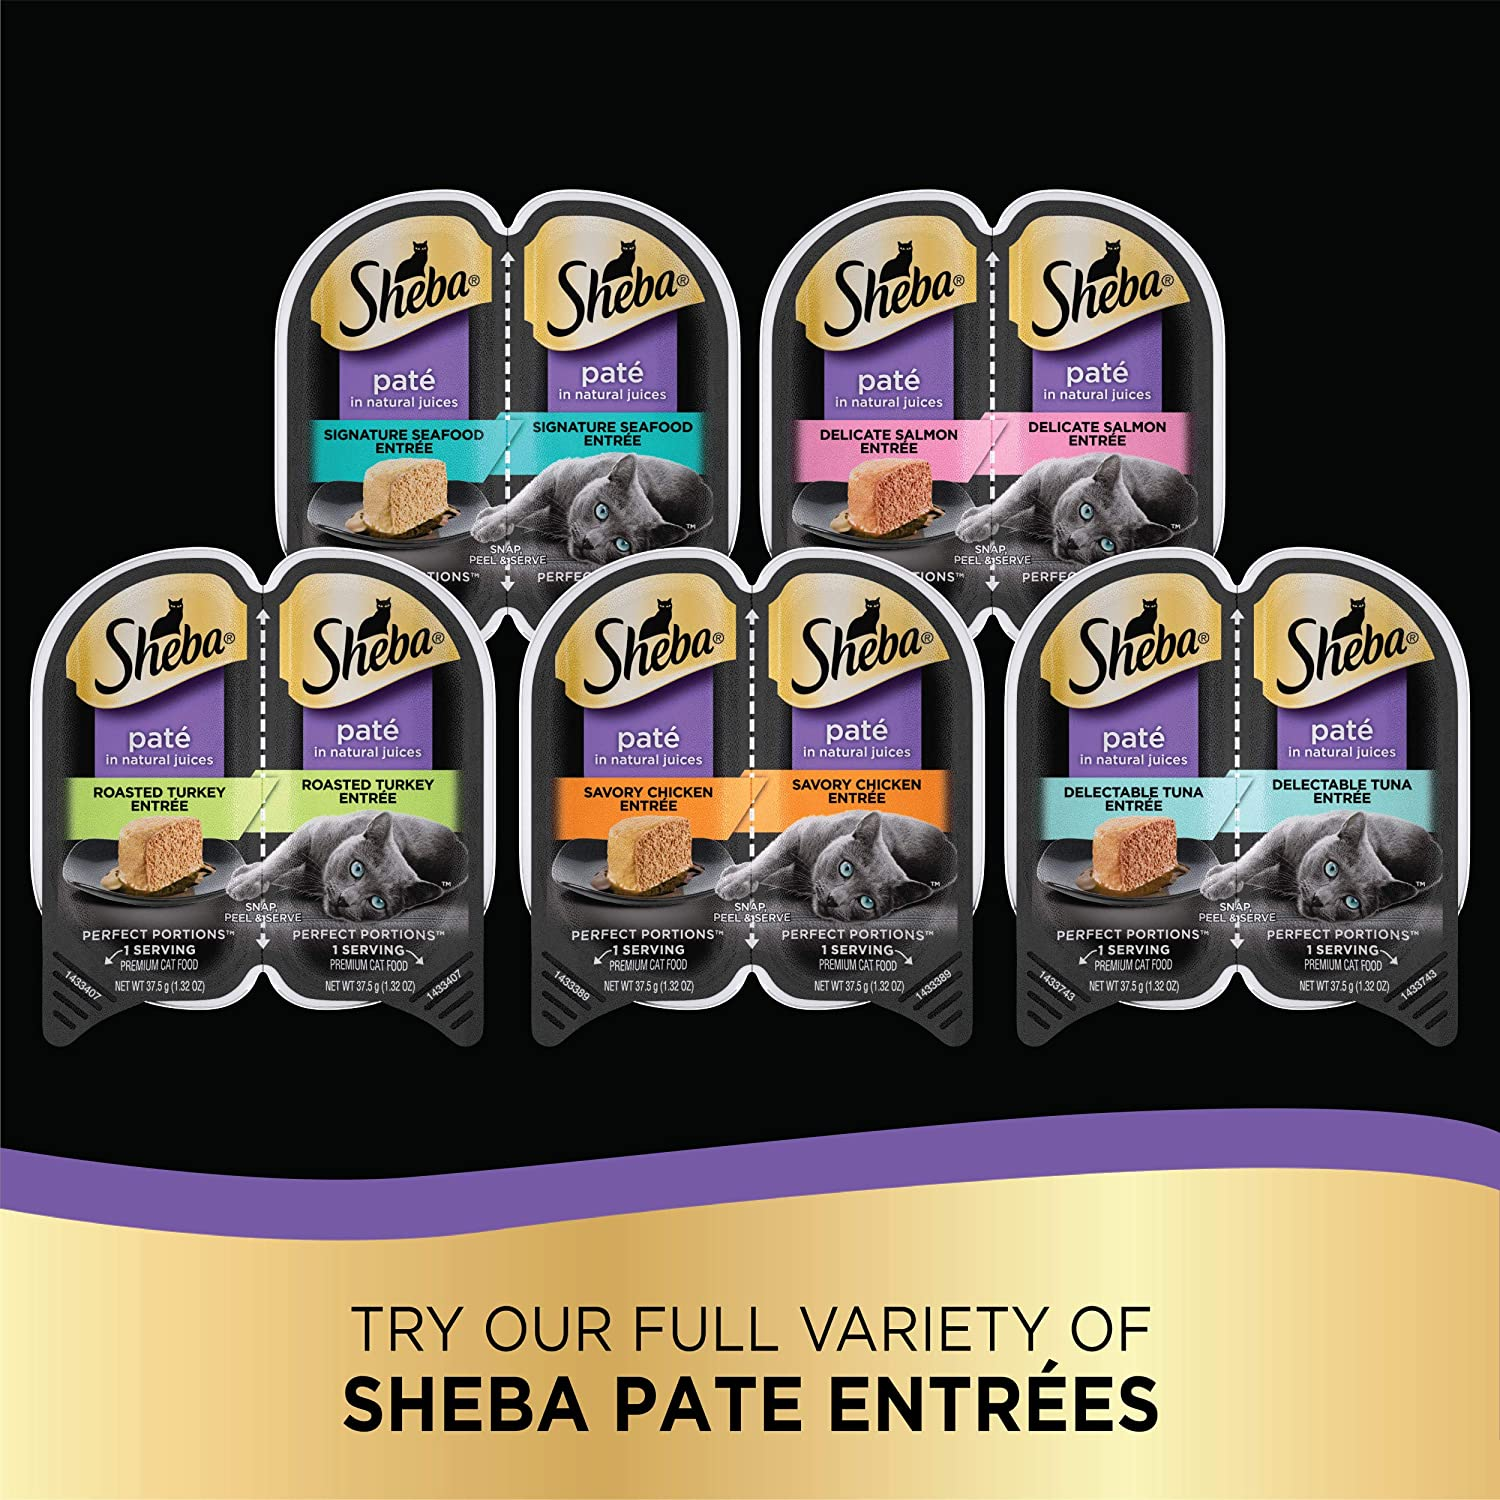 SHEBA PERFECT PORTIONS Wet Cat Food Paté in Natural Juices Savory Chicken, Roasted Turkey, & Tender Beef Entrées Variety Pack, (24) 2.6 Oz. Twin-Pack Trays